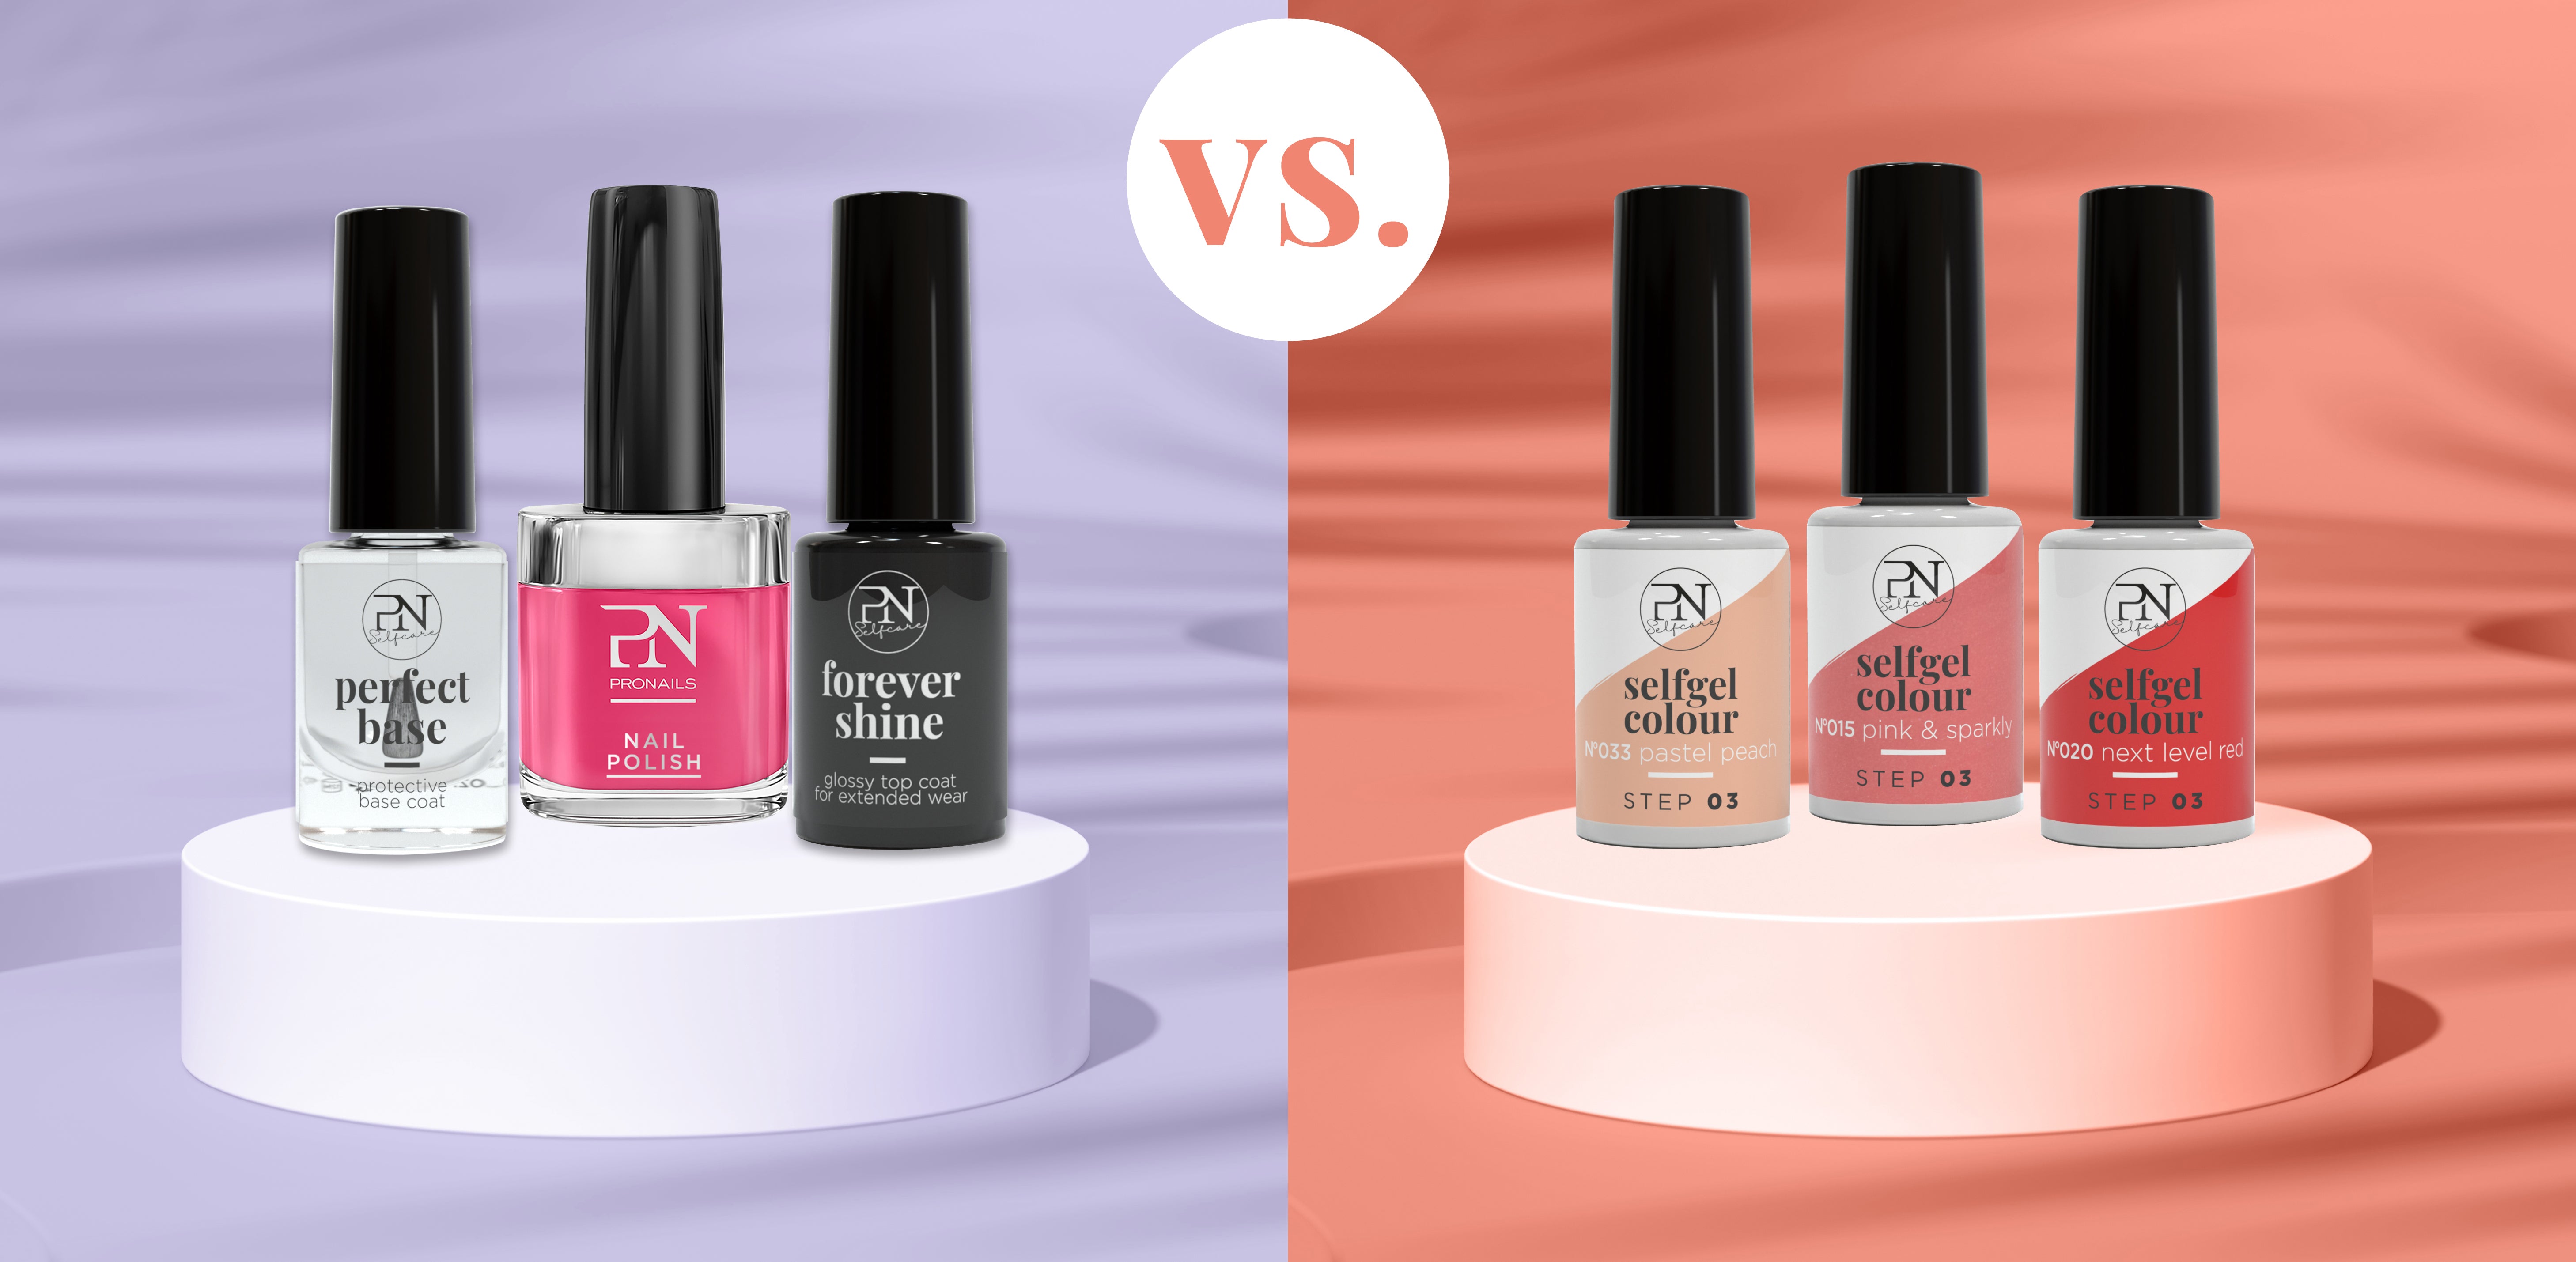 What Is The Difference Between Regular Nail Polish And Gel Polish?